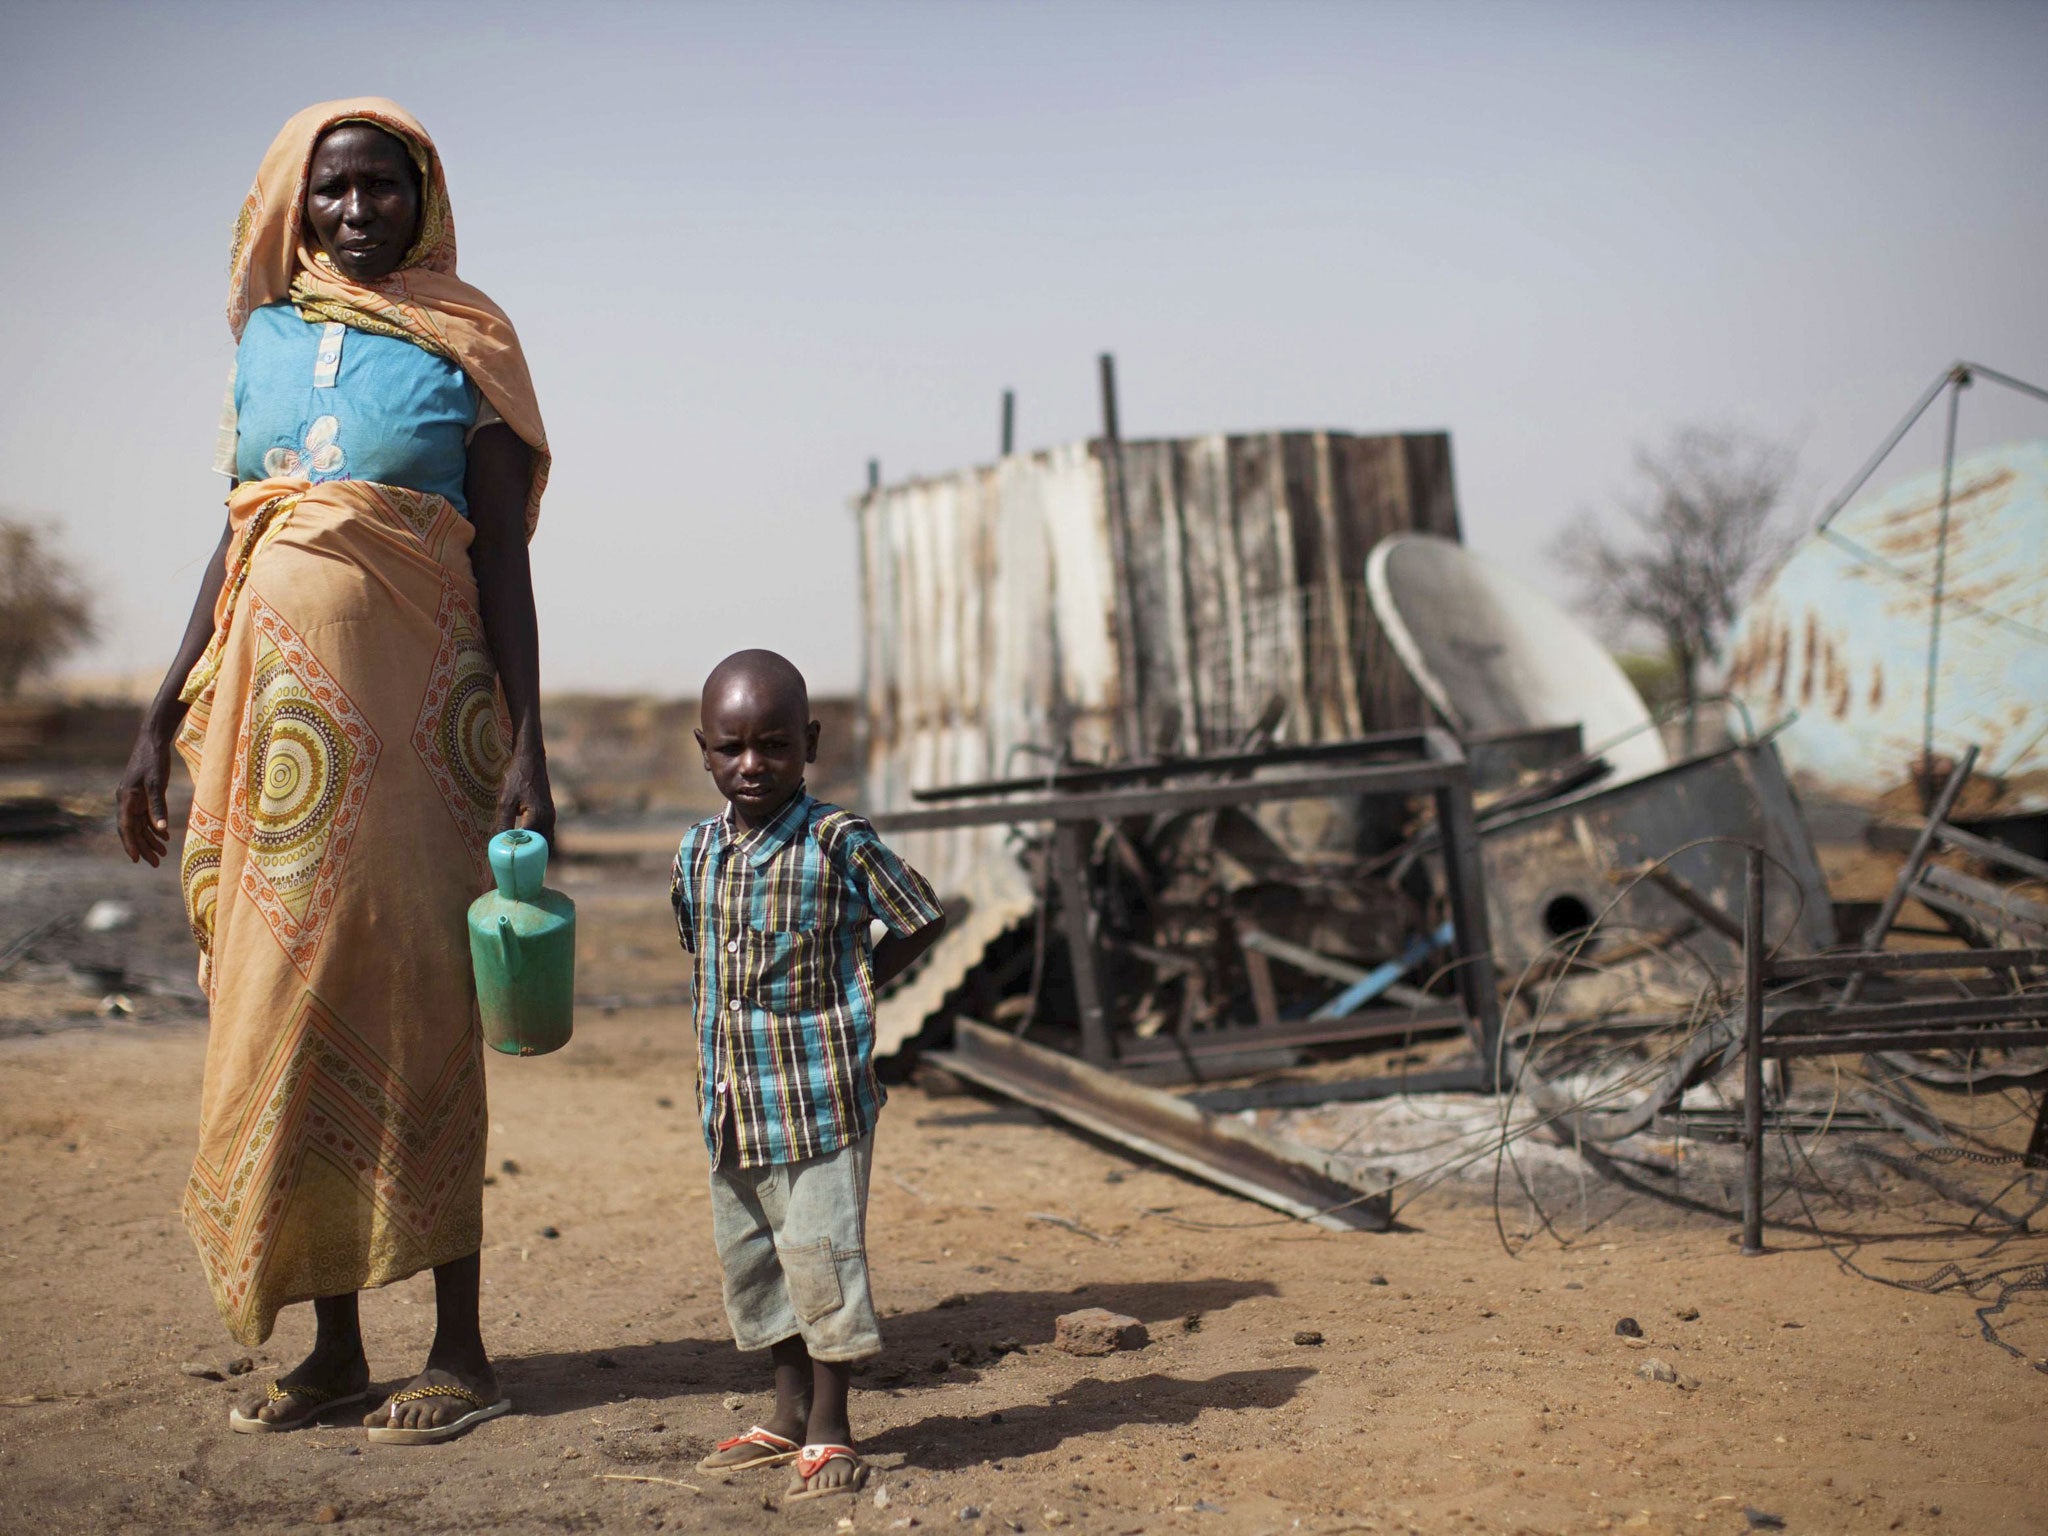 A displaced mother and her child inspect the remnants of their burnt house in Khor Abeche, South Darfur